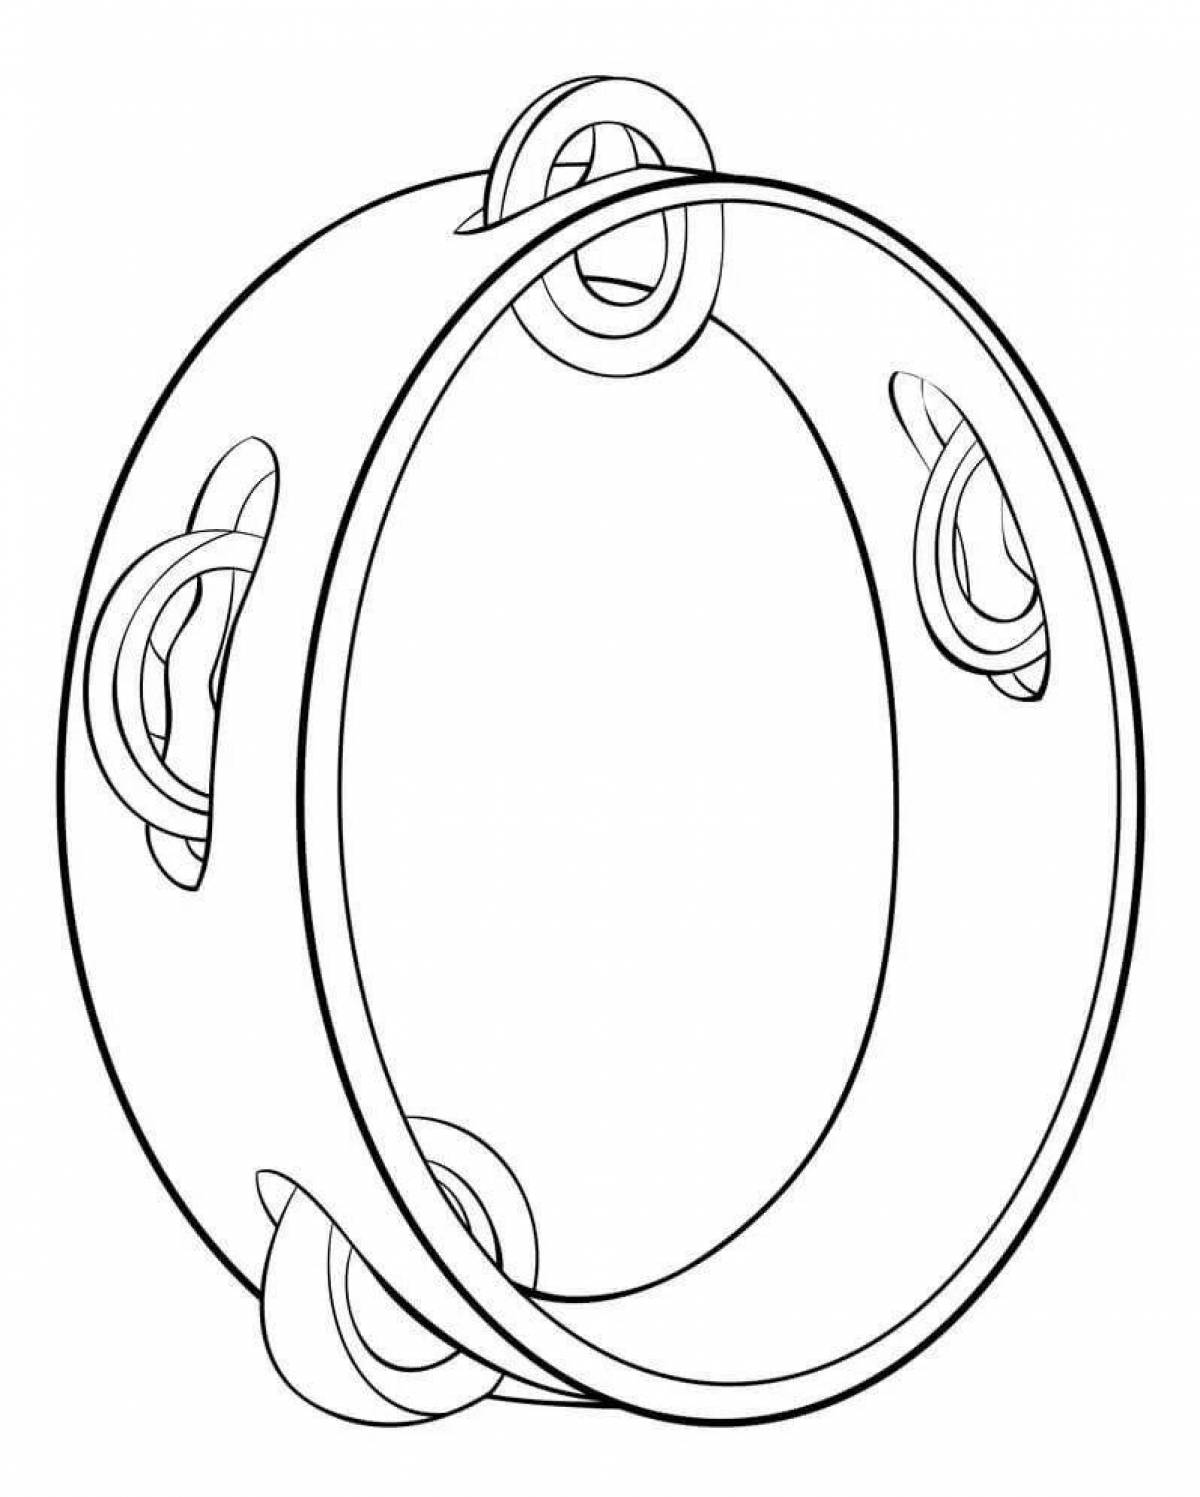 Festive tambourine coloring page